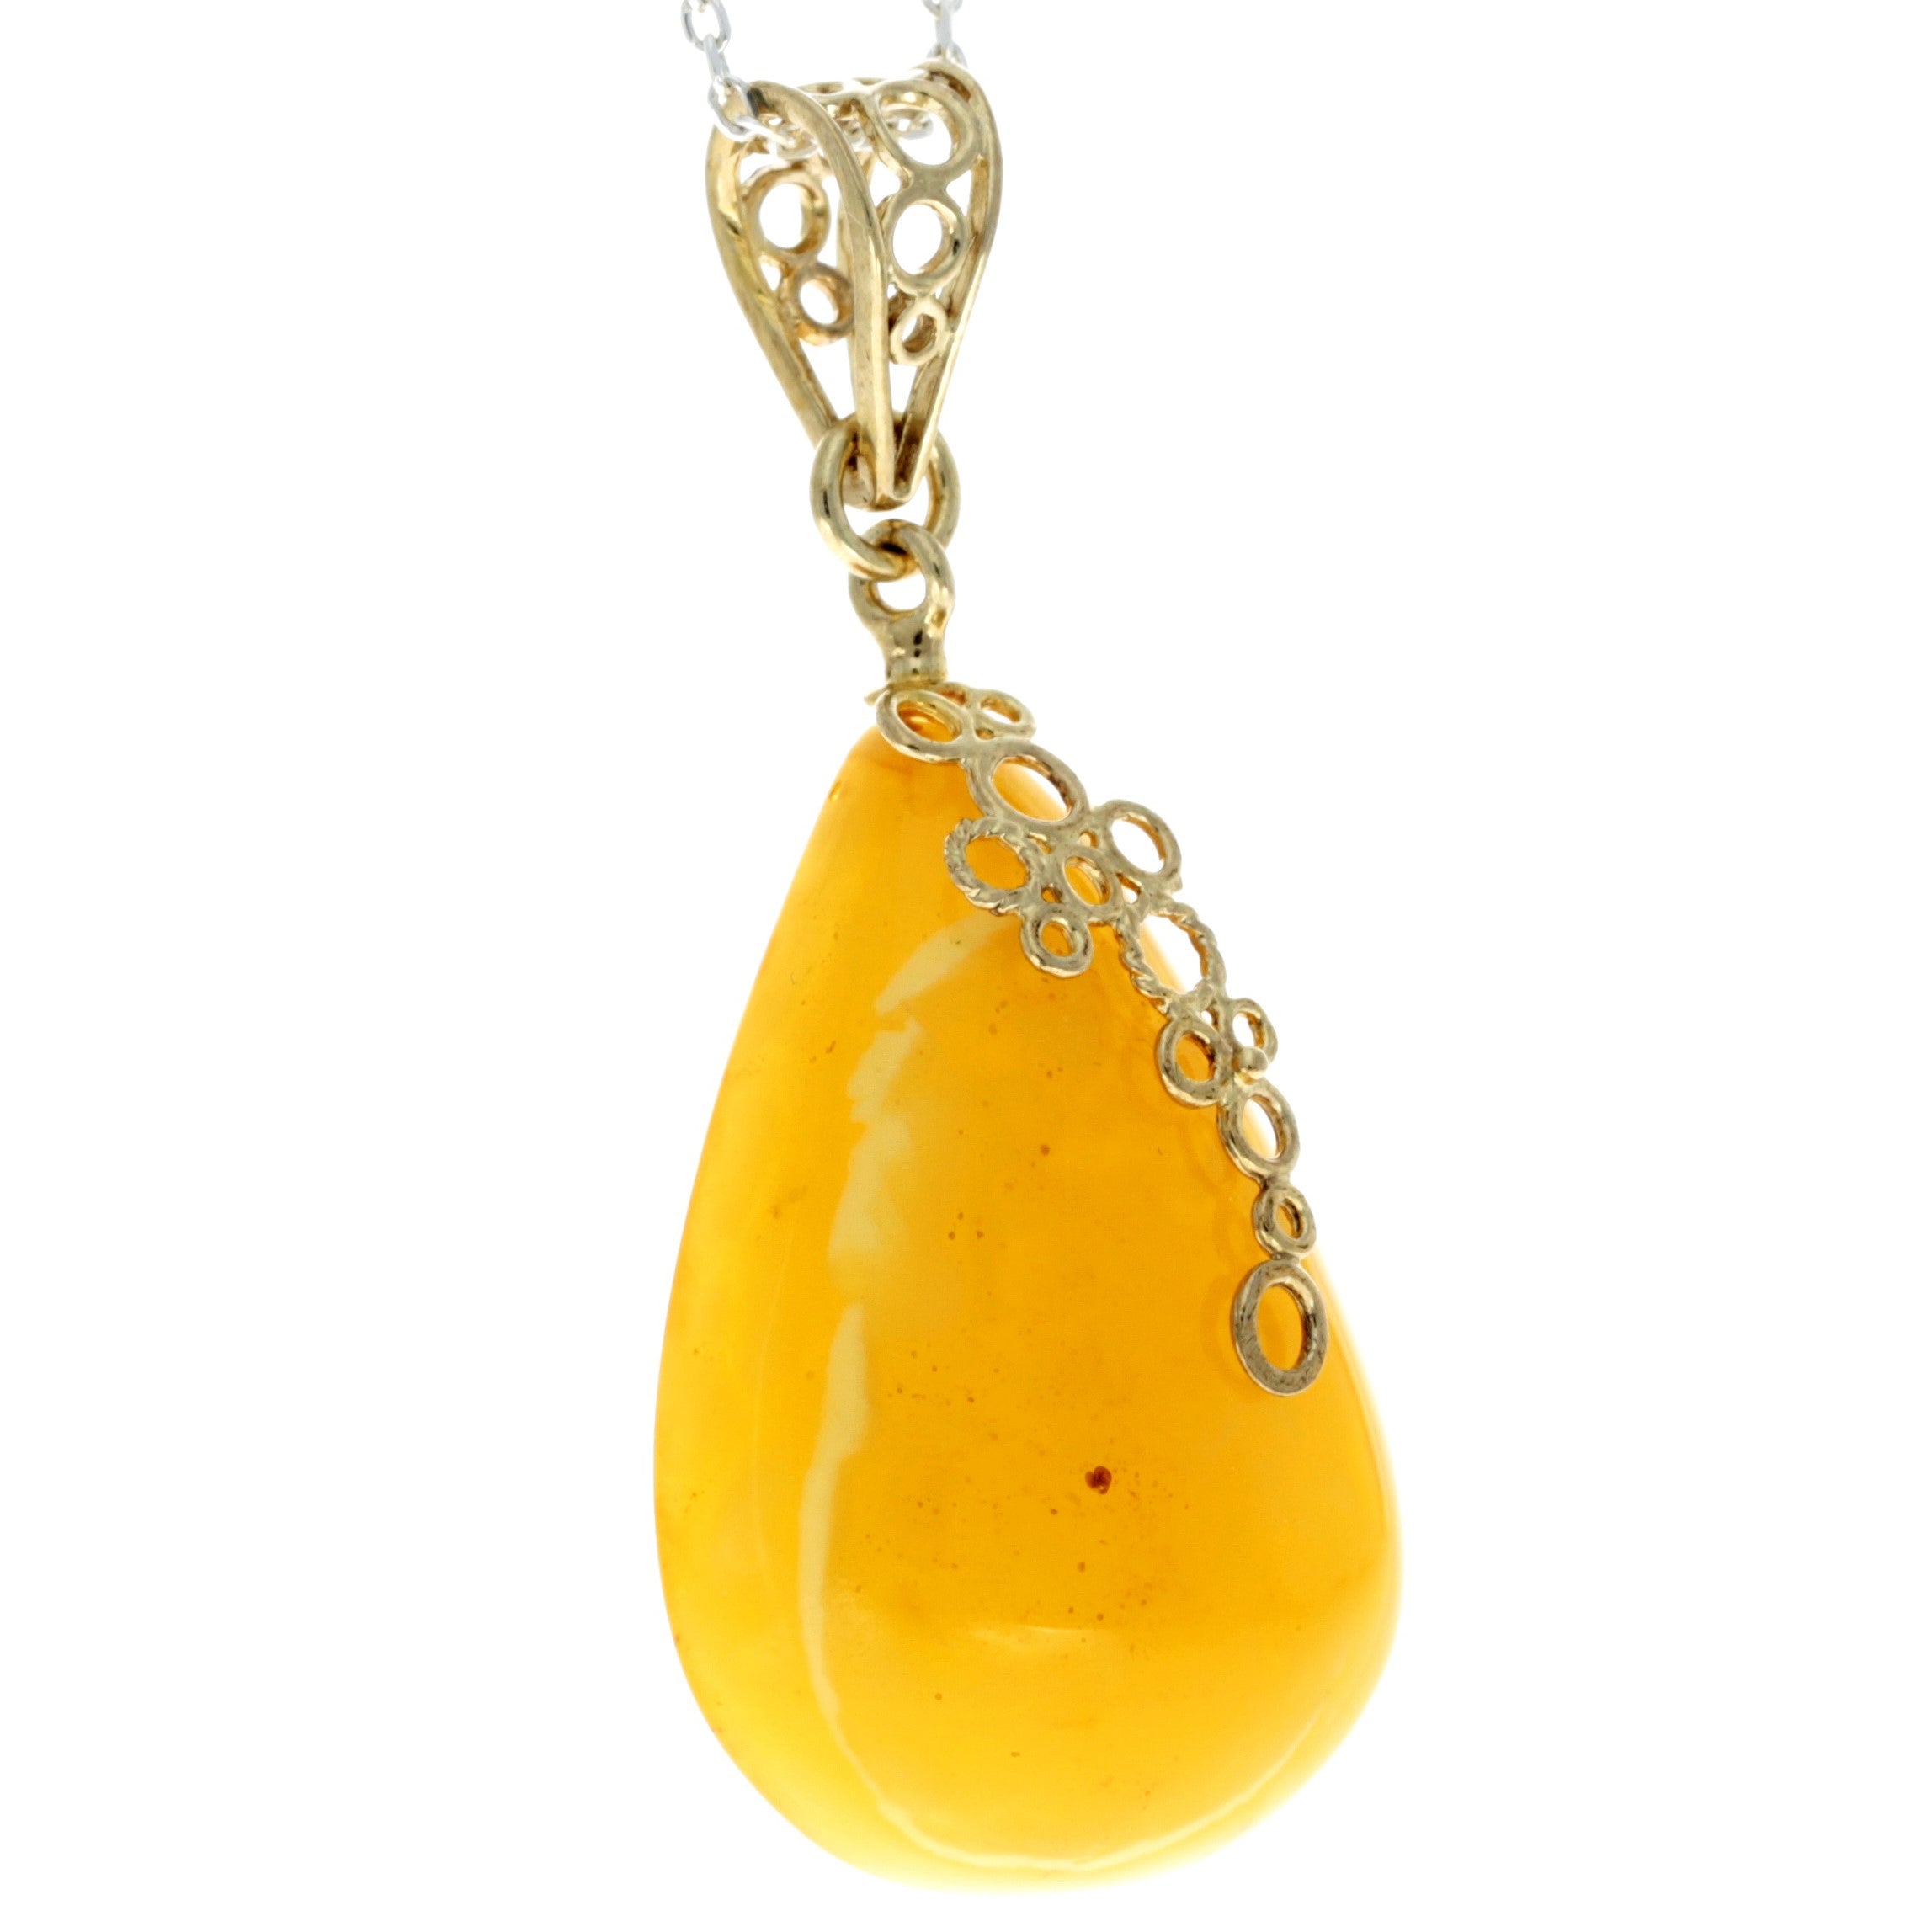 925 Sterling Silver Gold Plated with 14 ct Gold & Genuine Lemon Baltic Amber Exclusive Unique Pendant - GPD002